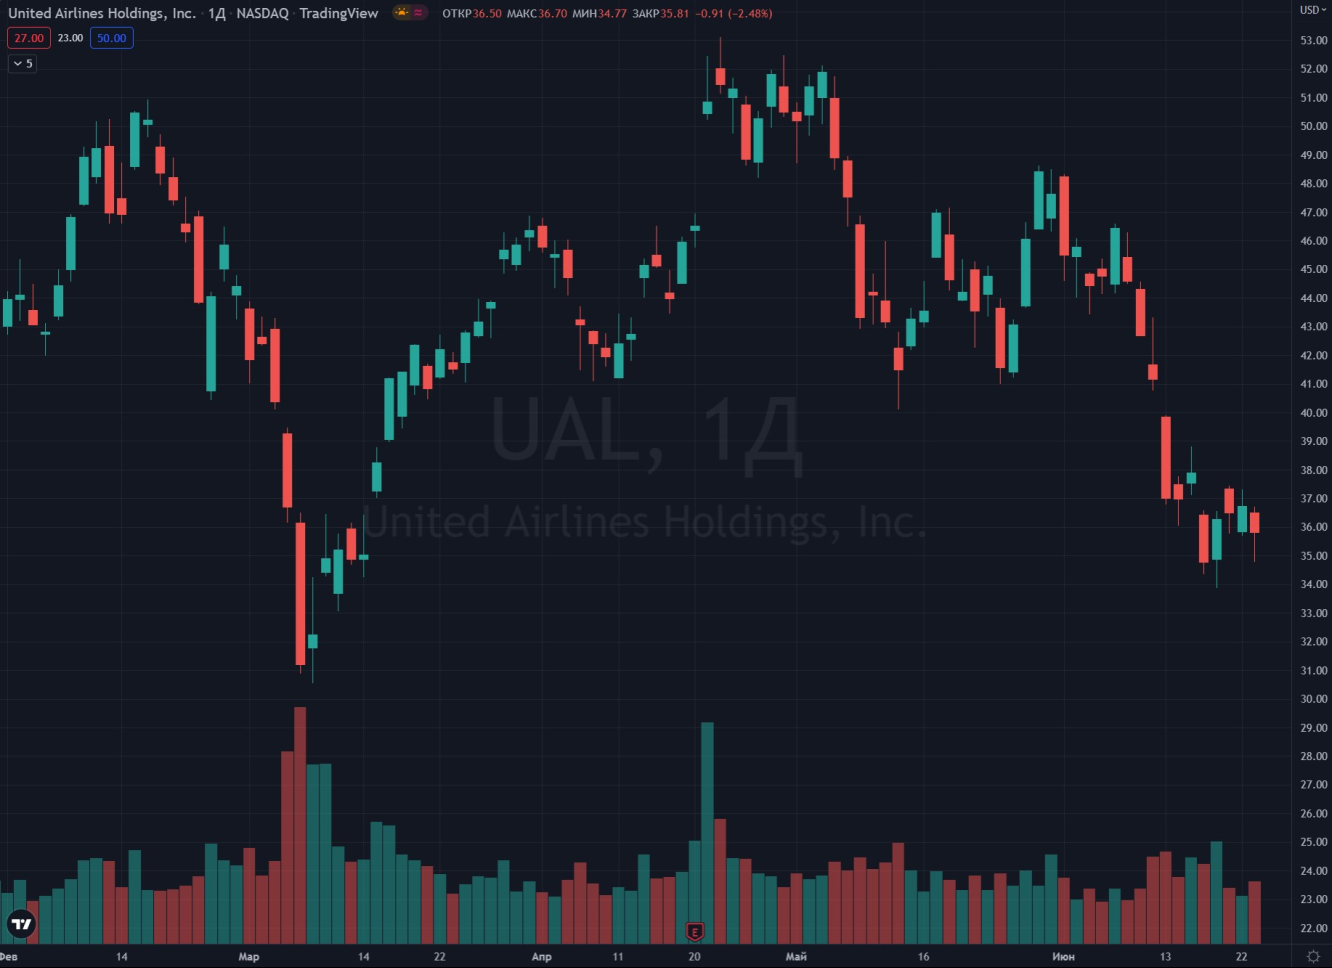 United Airlines $UAL